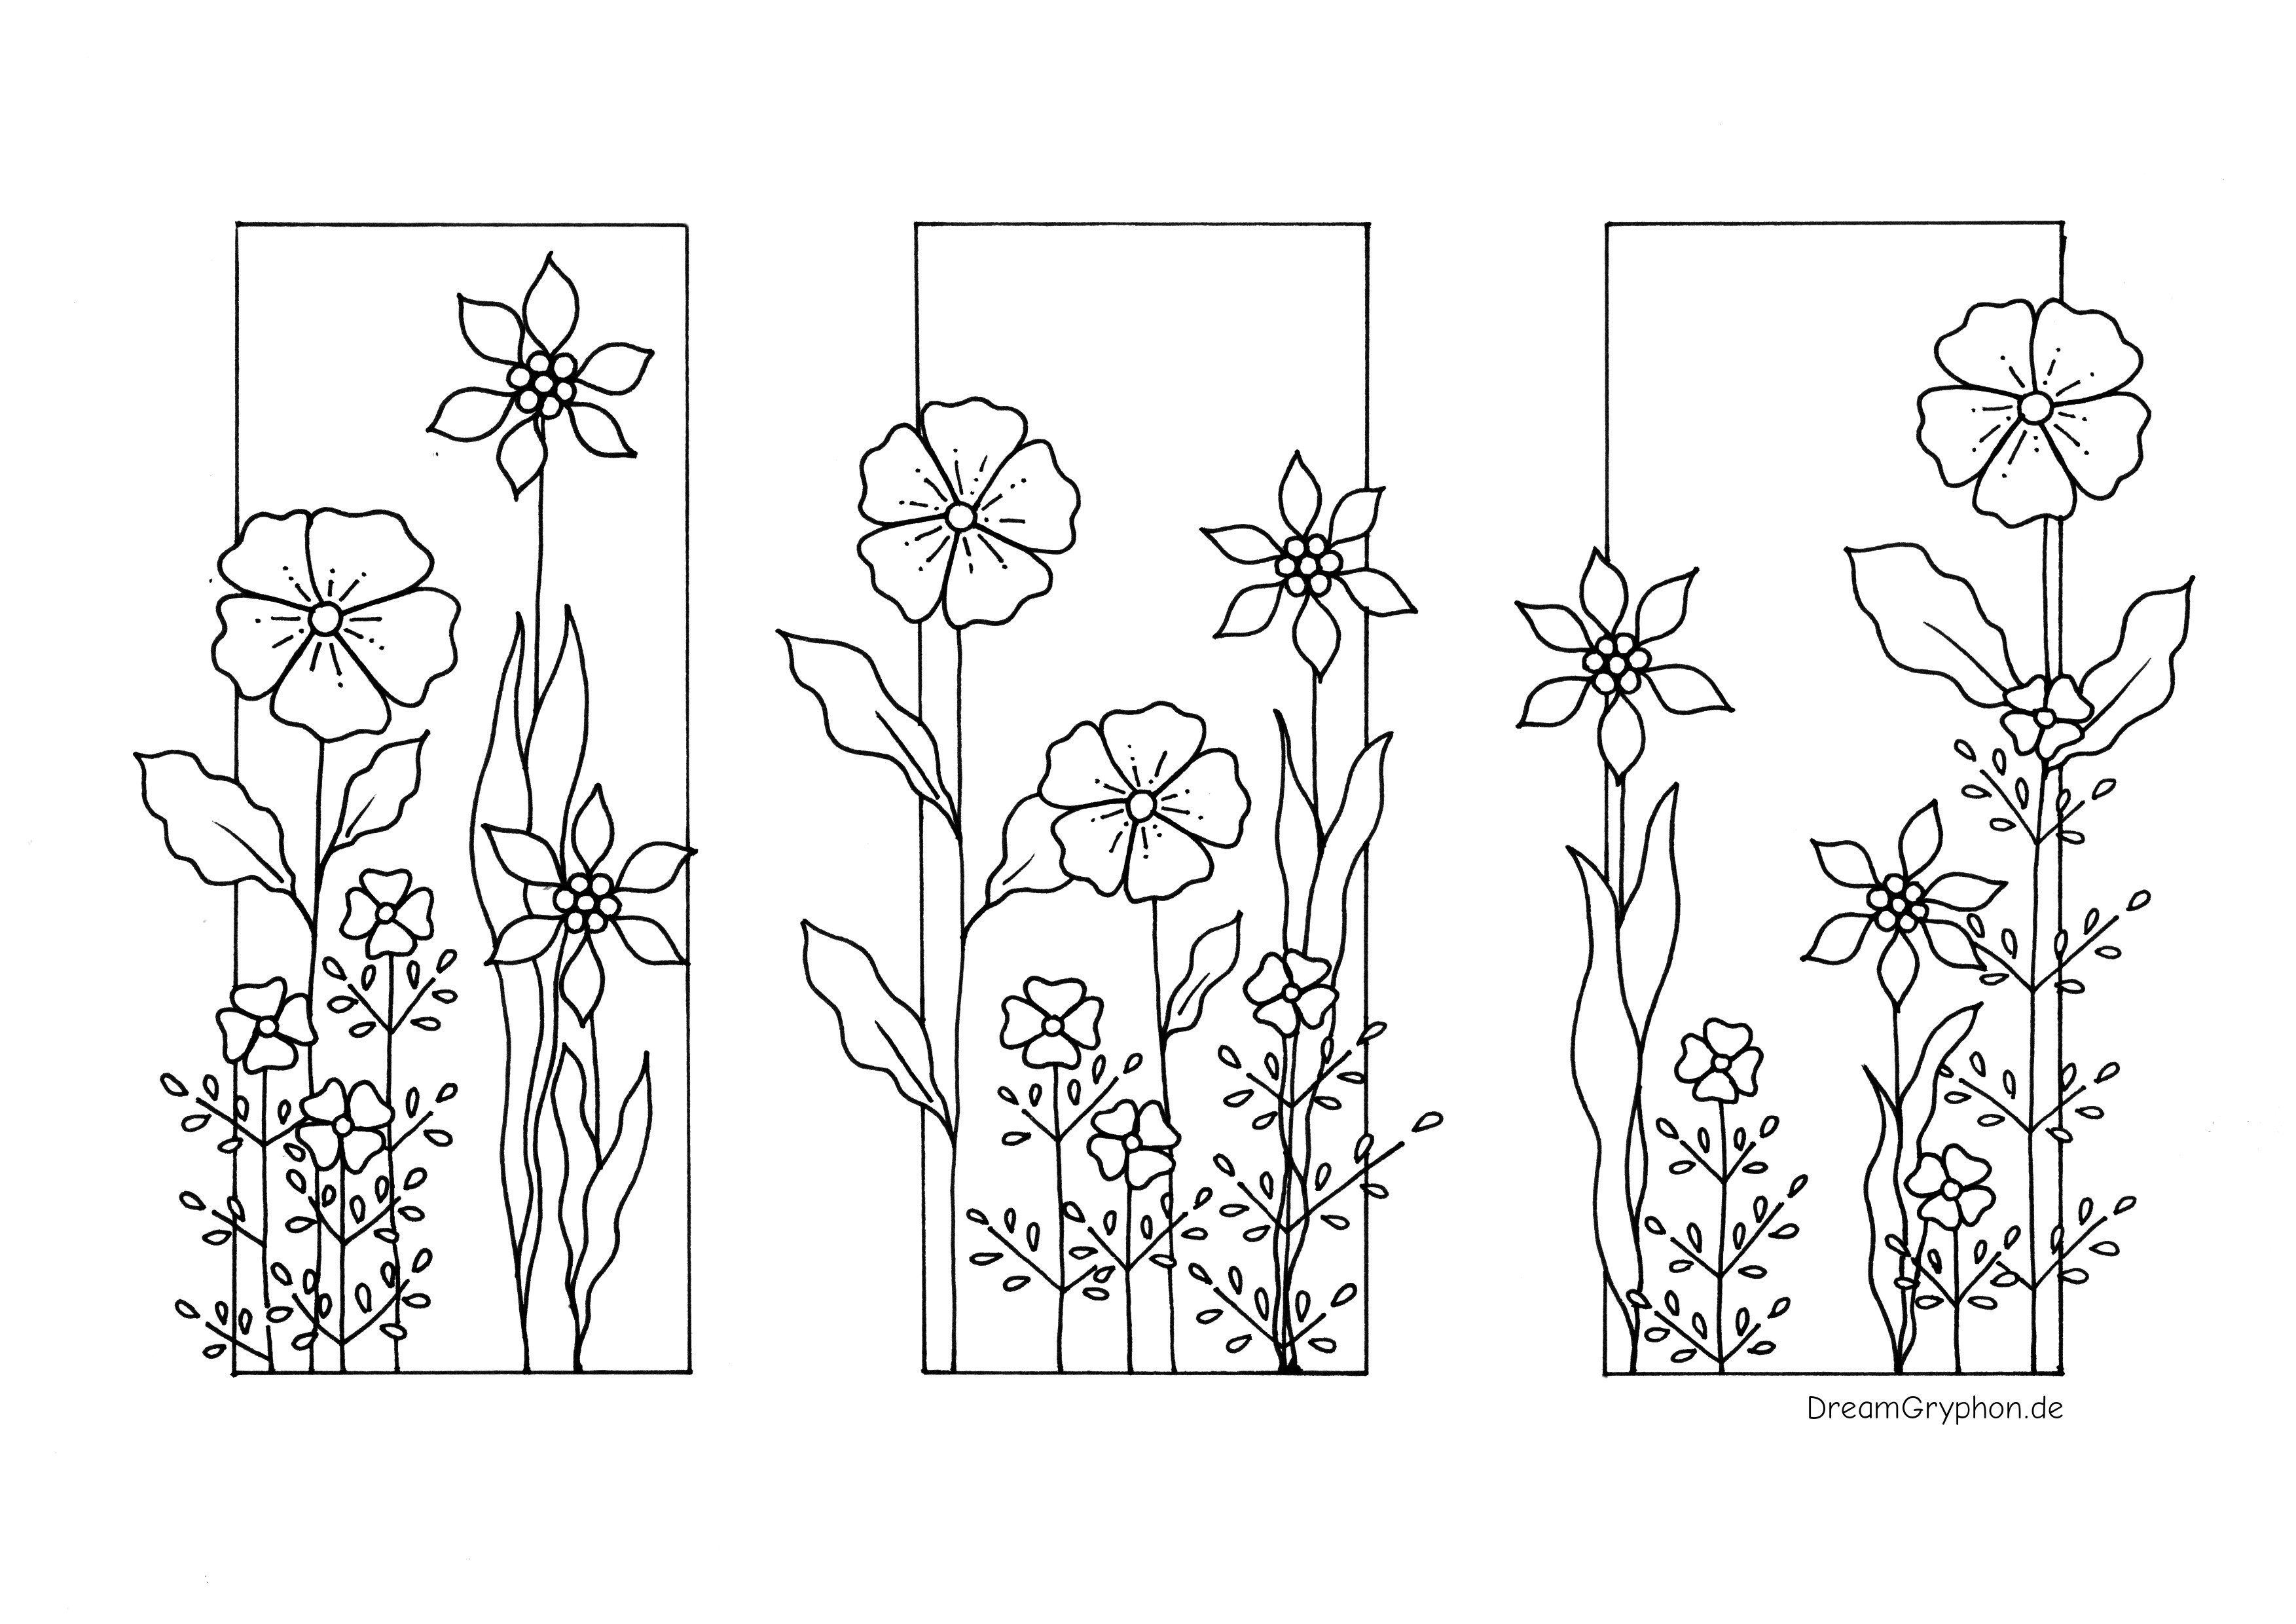 Coloring Page: Different types of flowers